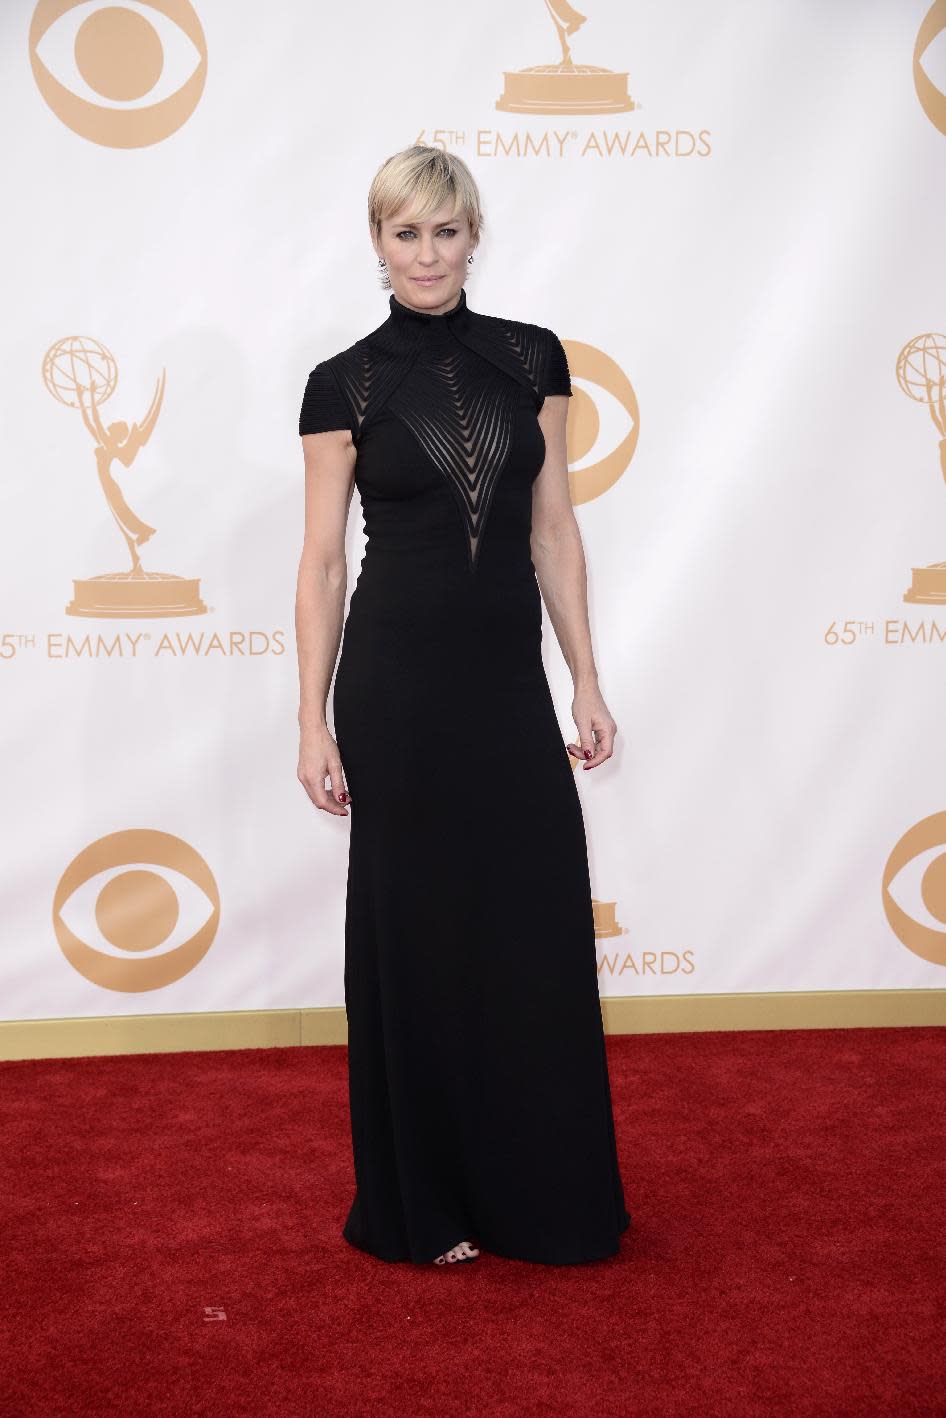 Robin Wright, wearing Ralph Lauren, arrives at the 65th Primetime Emmy Awards at Nokia Theatre on Sunday Sept. 22, 2013, in Los Angeles. (Photo by Dan Steinberg/Invision/AP)